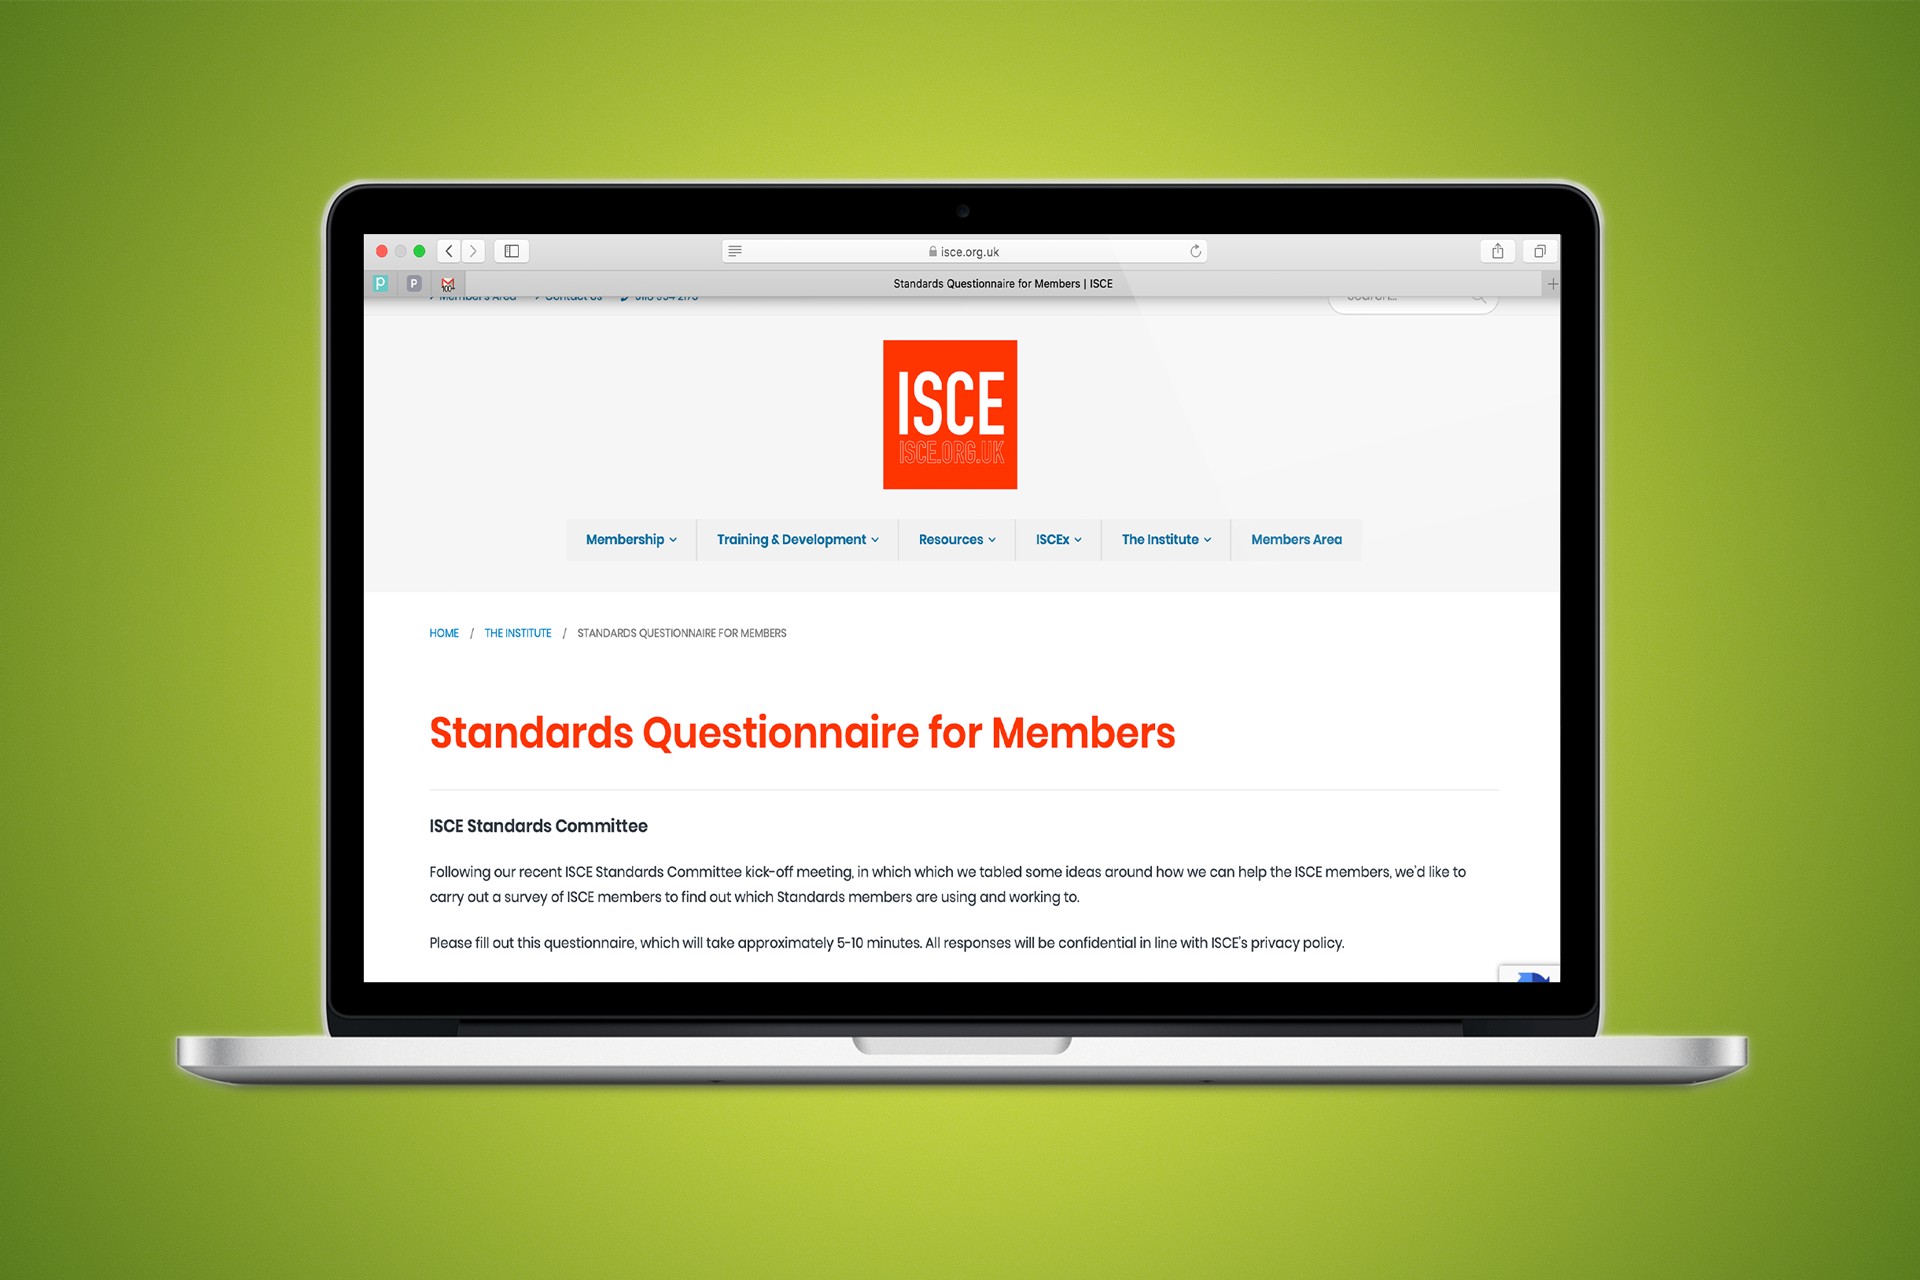 New Online Questionnaire for ISCE